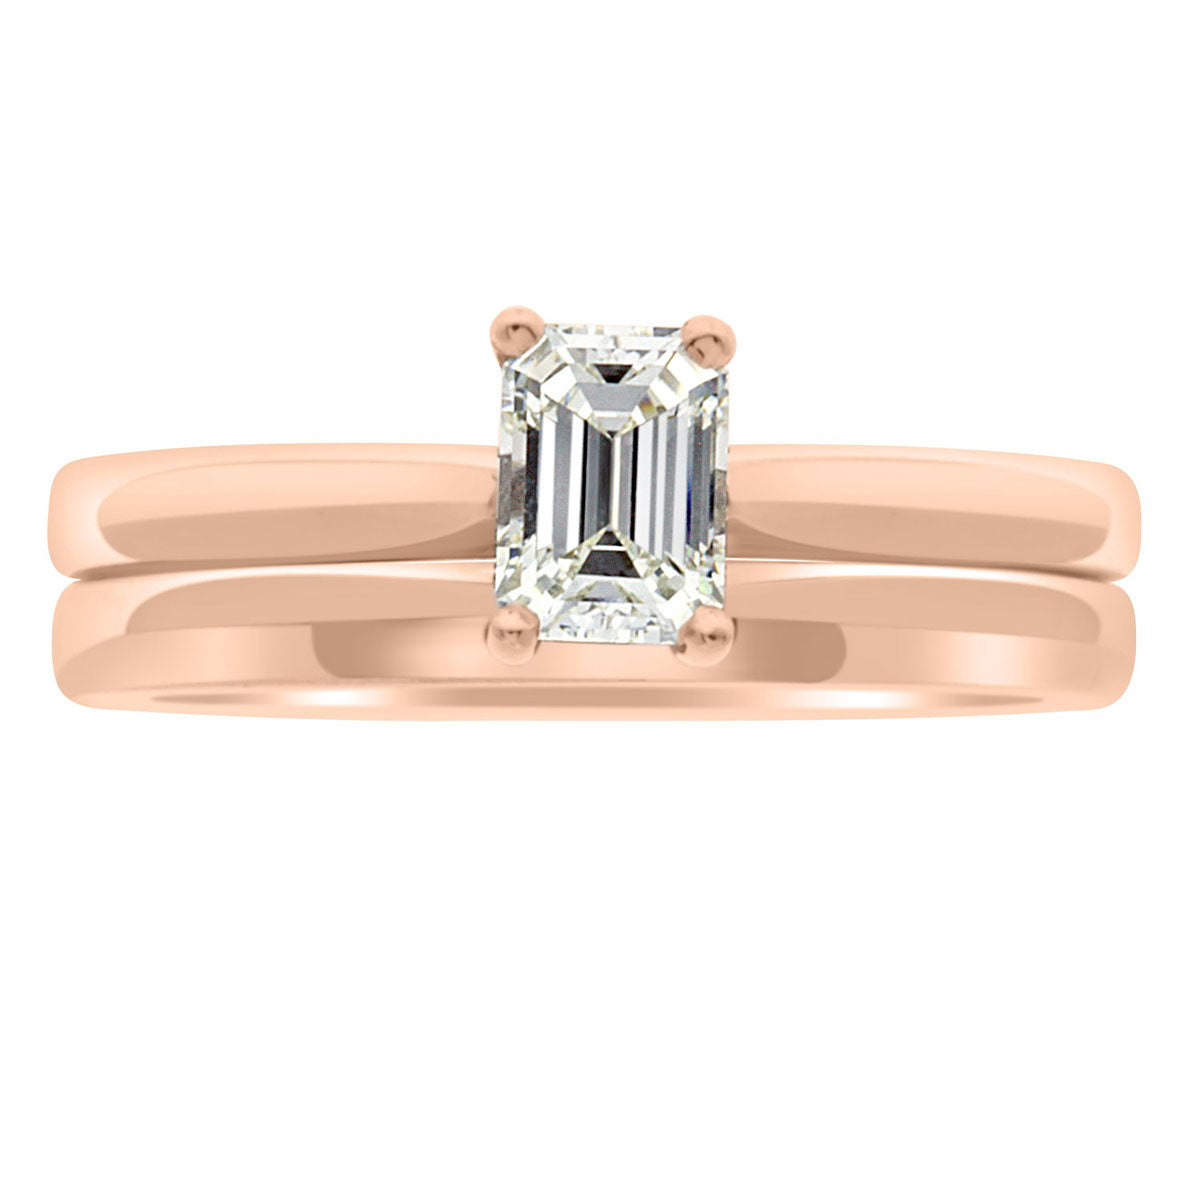 Emerald Cut Ring Solitaire Engagement Ring in rose gold standing upright with a plain wedding ring